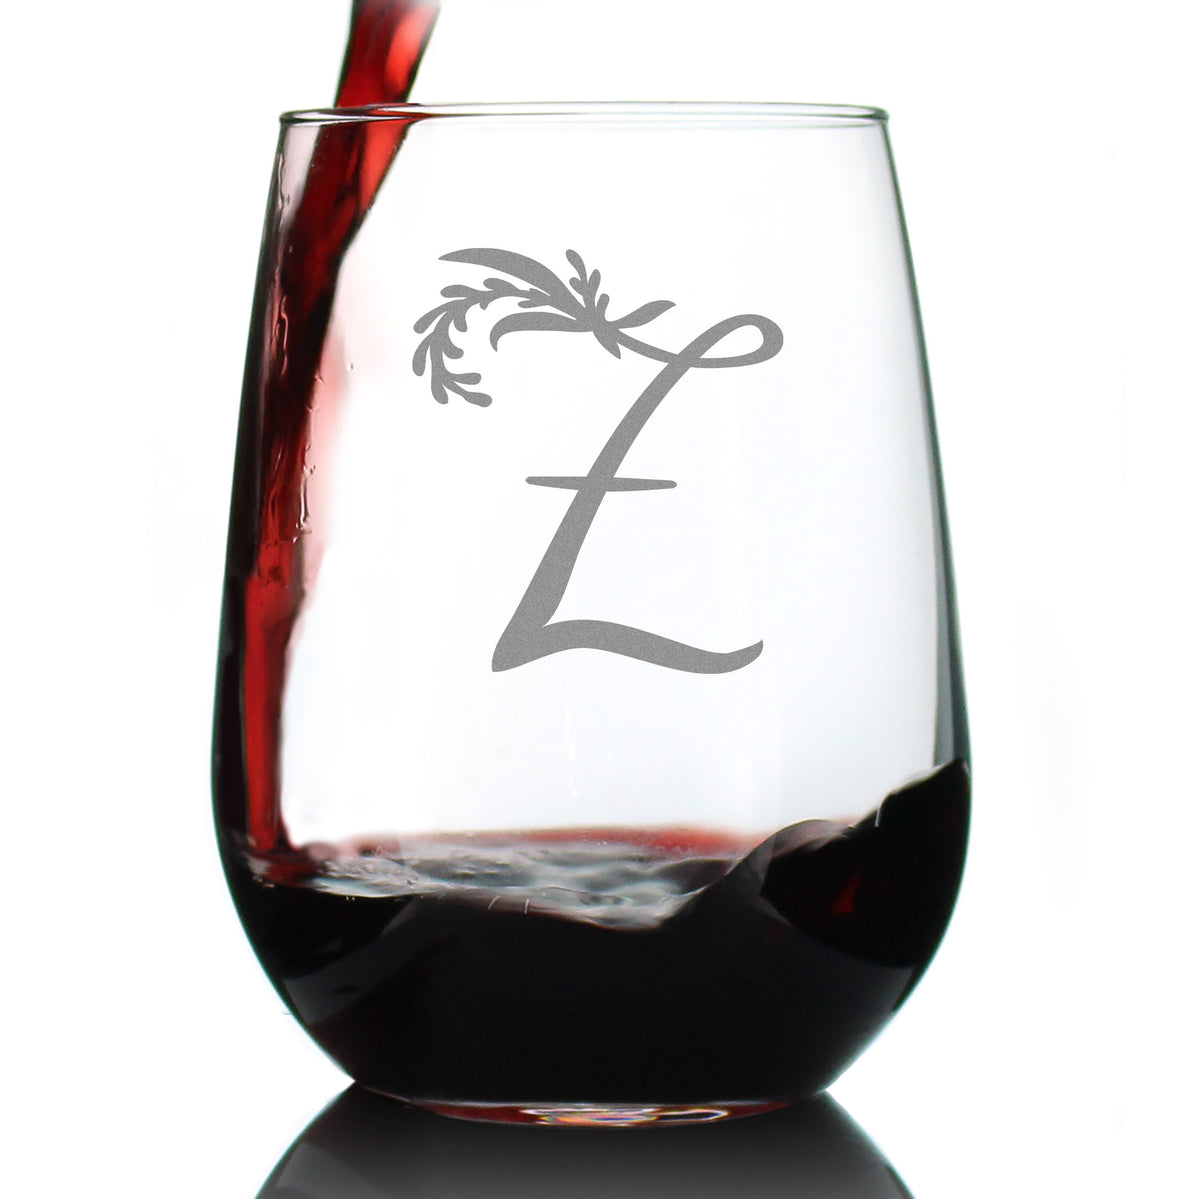 Monogram Floral Letter Z - Stemless Wine Glass - Personalized Gifts for Women and Men - Large Engraved 17 Oz Glasses